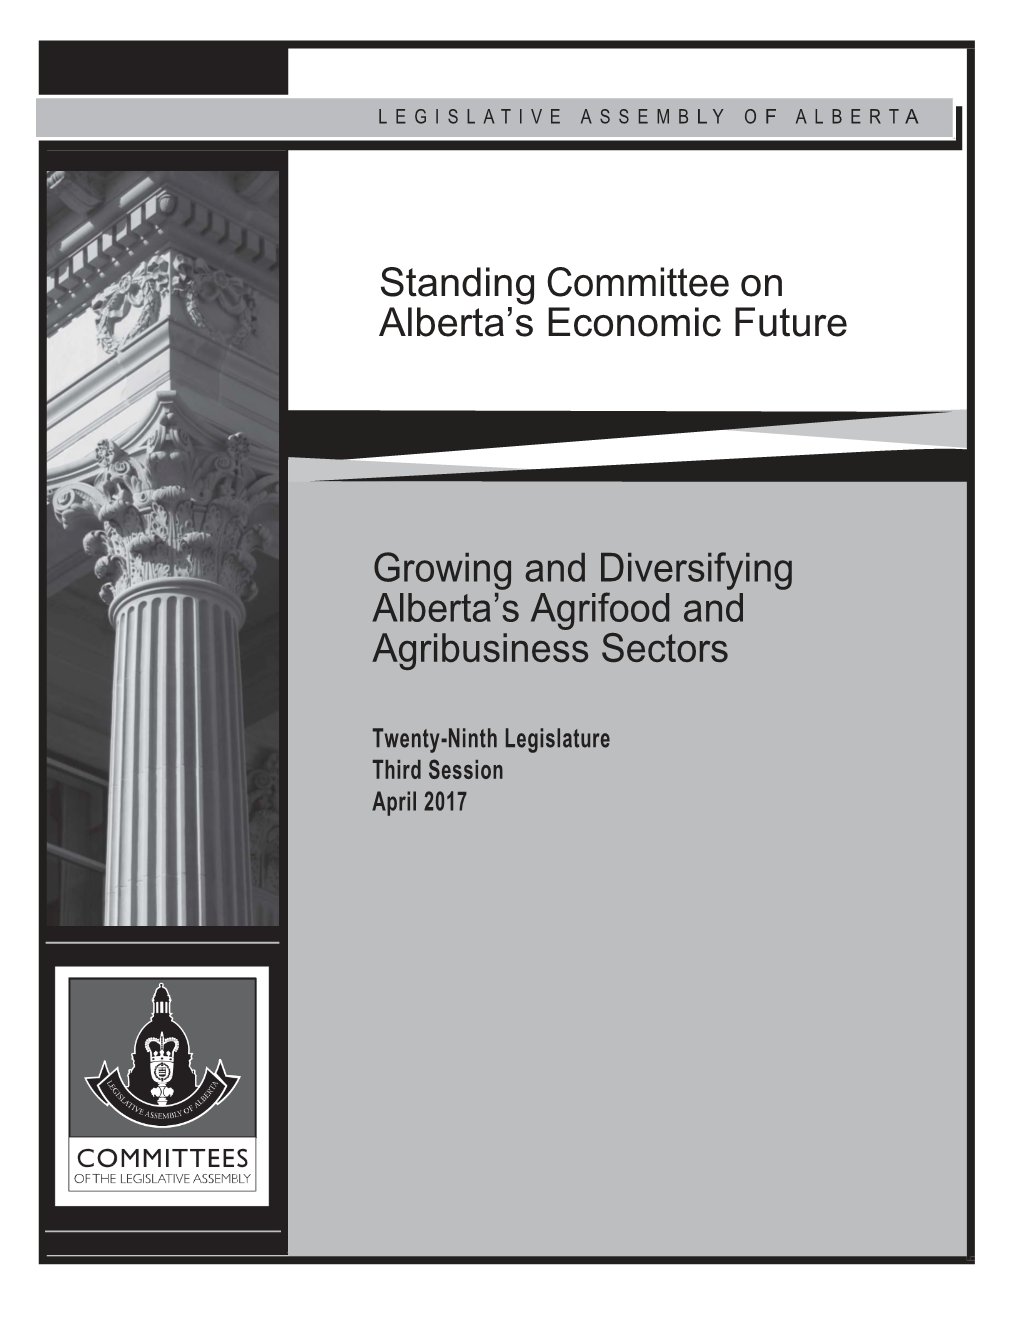 Report on Growing and Diversifying Alberta's Agrifood and Agribusiness